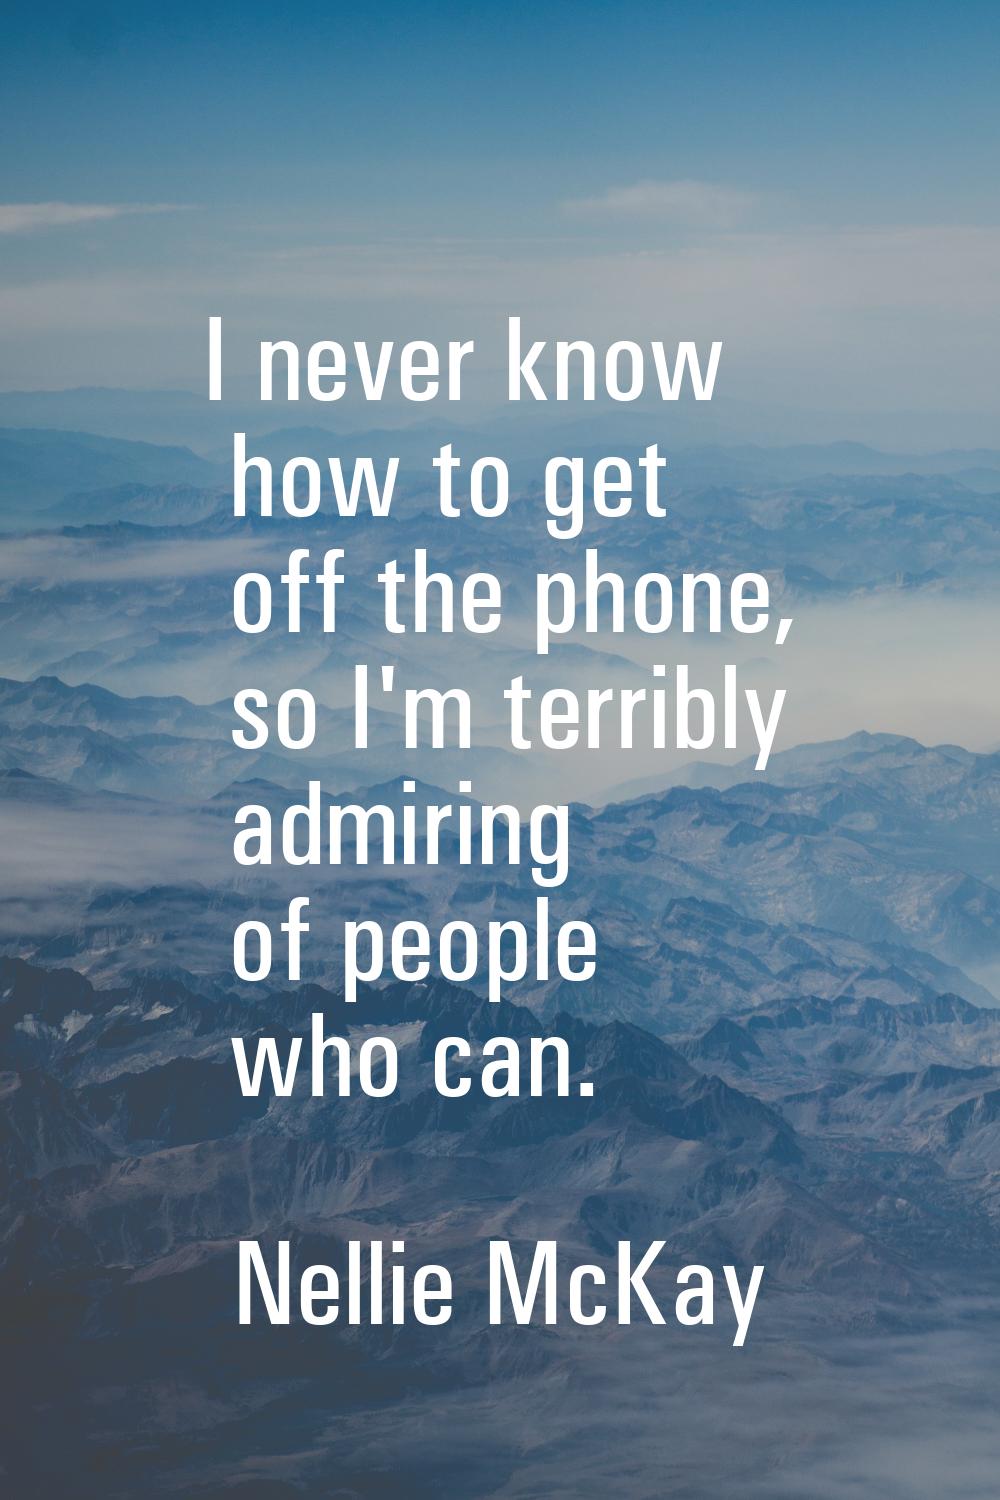 I never know how to get off the phone, so I'm terribly admiring of people who can.